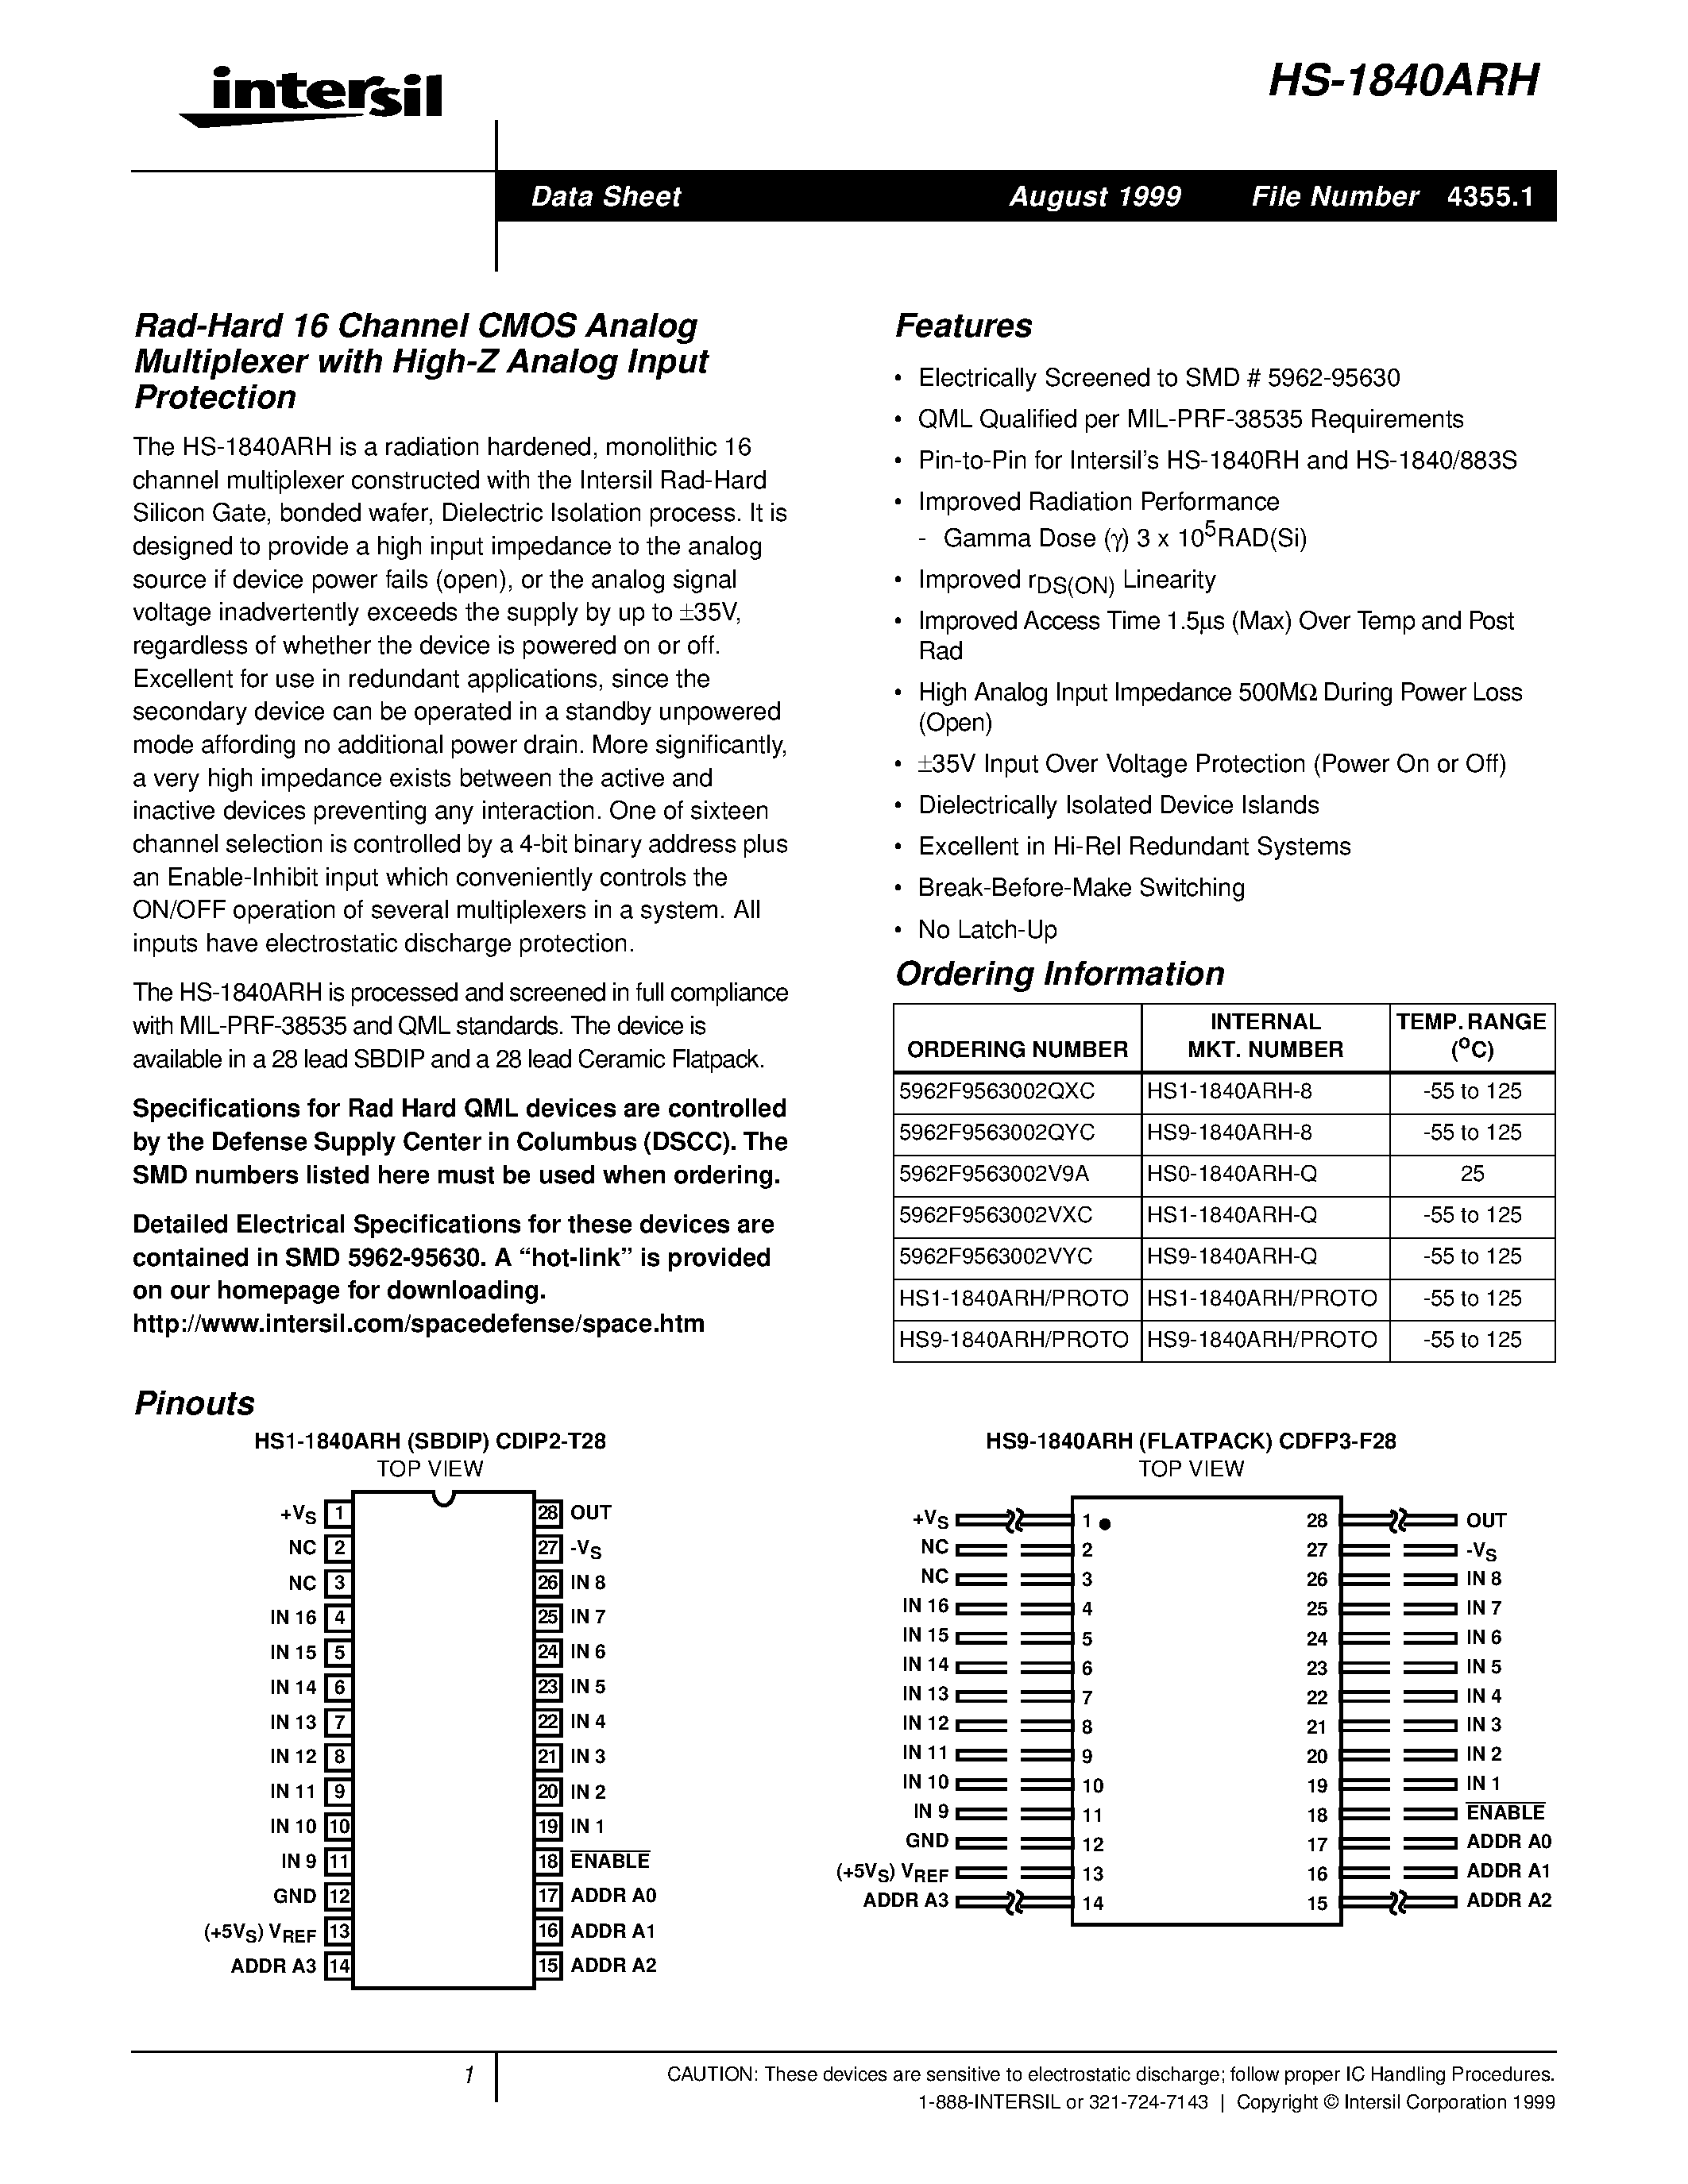 Datasheet HS9-1840ARH-Q - Rad-Hard 16 Channel CMOS Analog Multiplexer with High-Z Analog Input Protection page 1